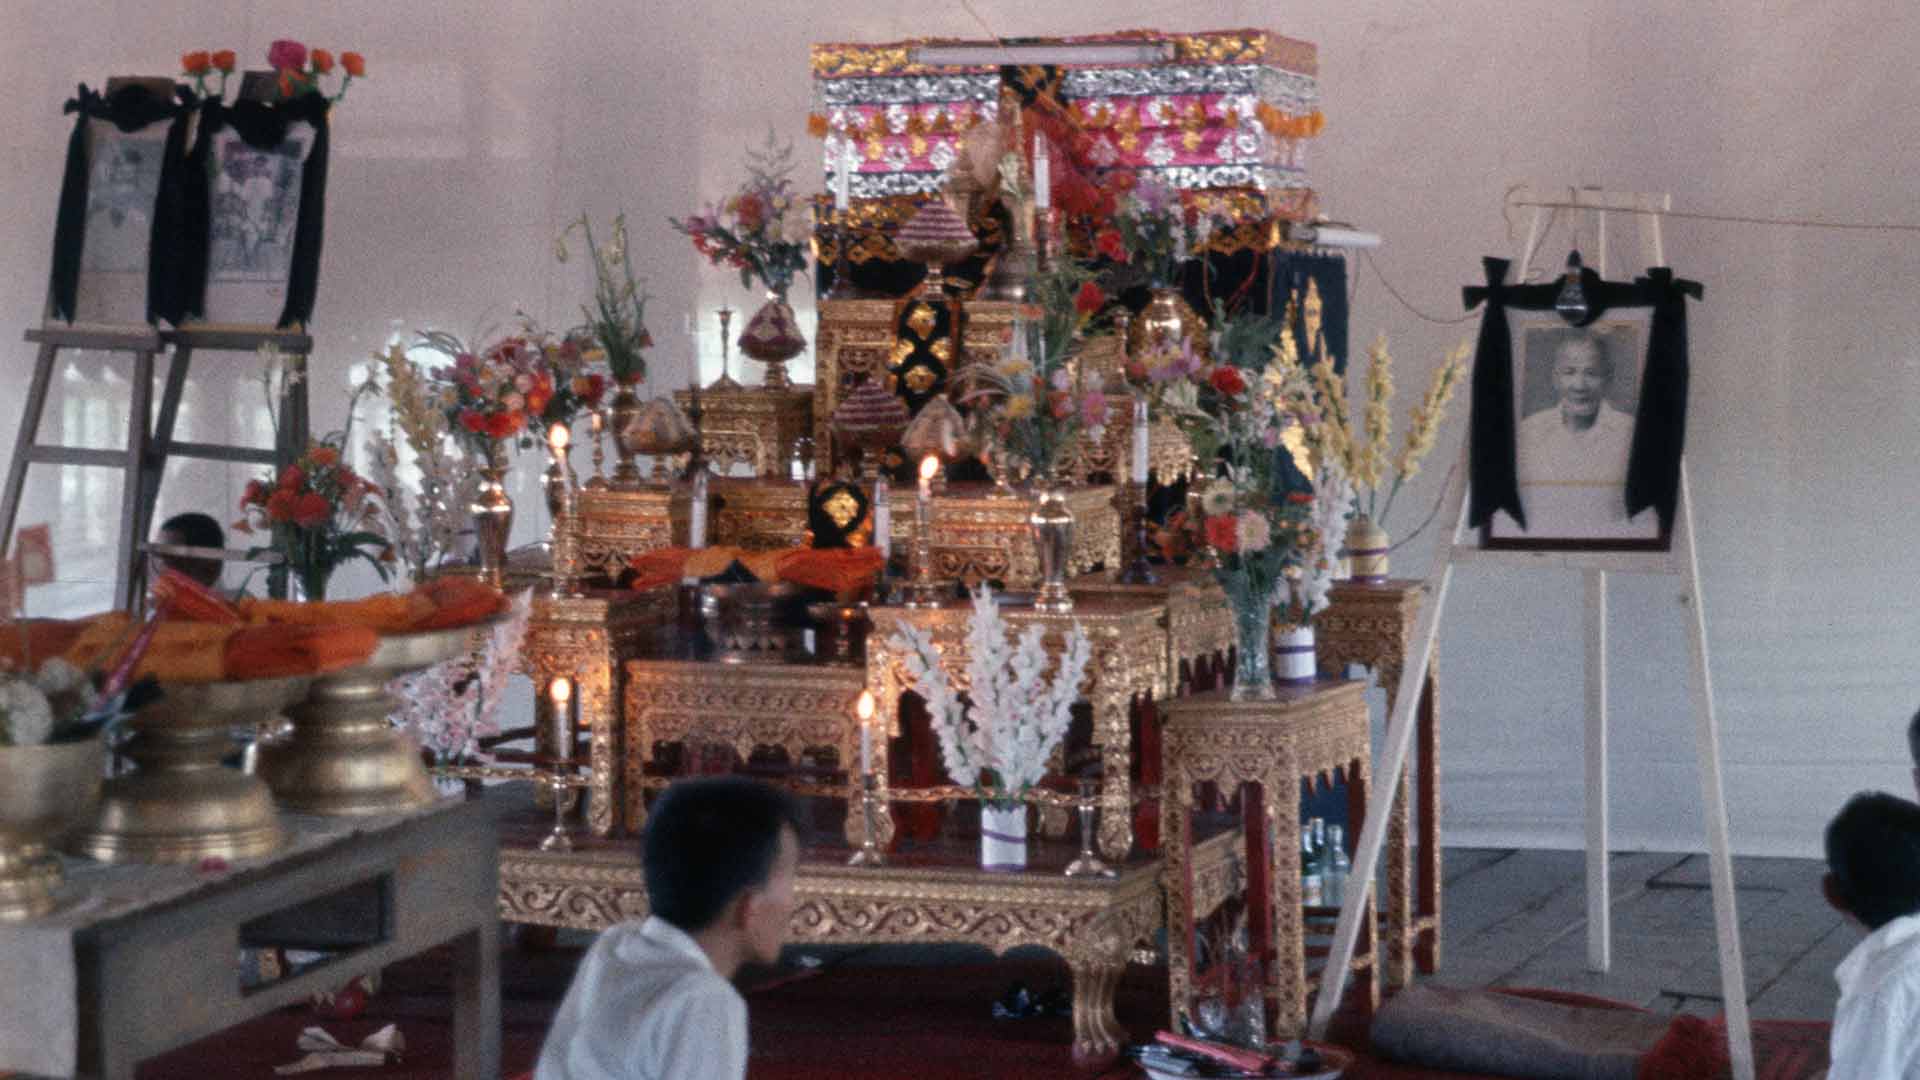 A shrine with offerings including photo of deceased